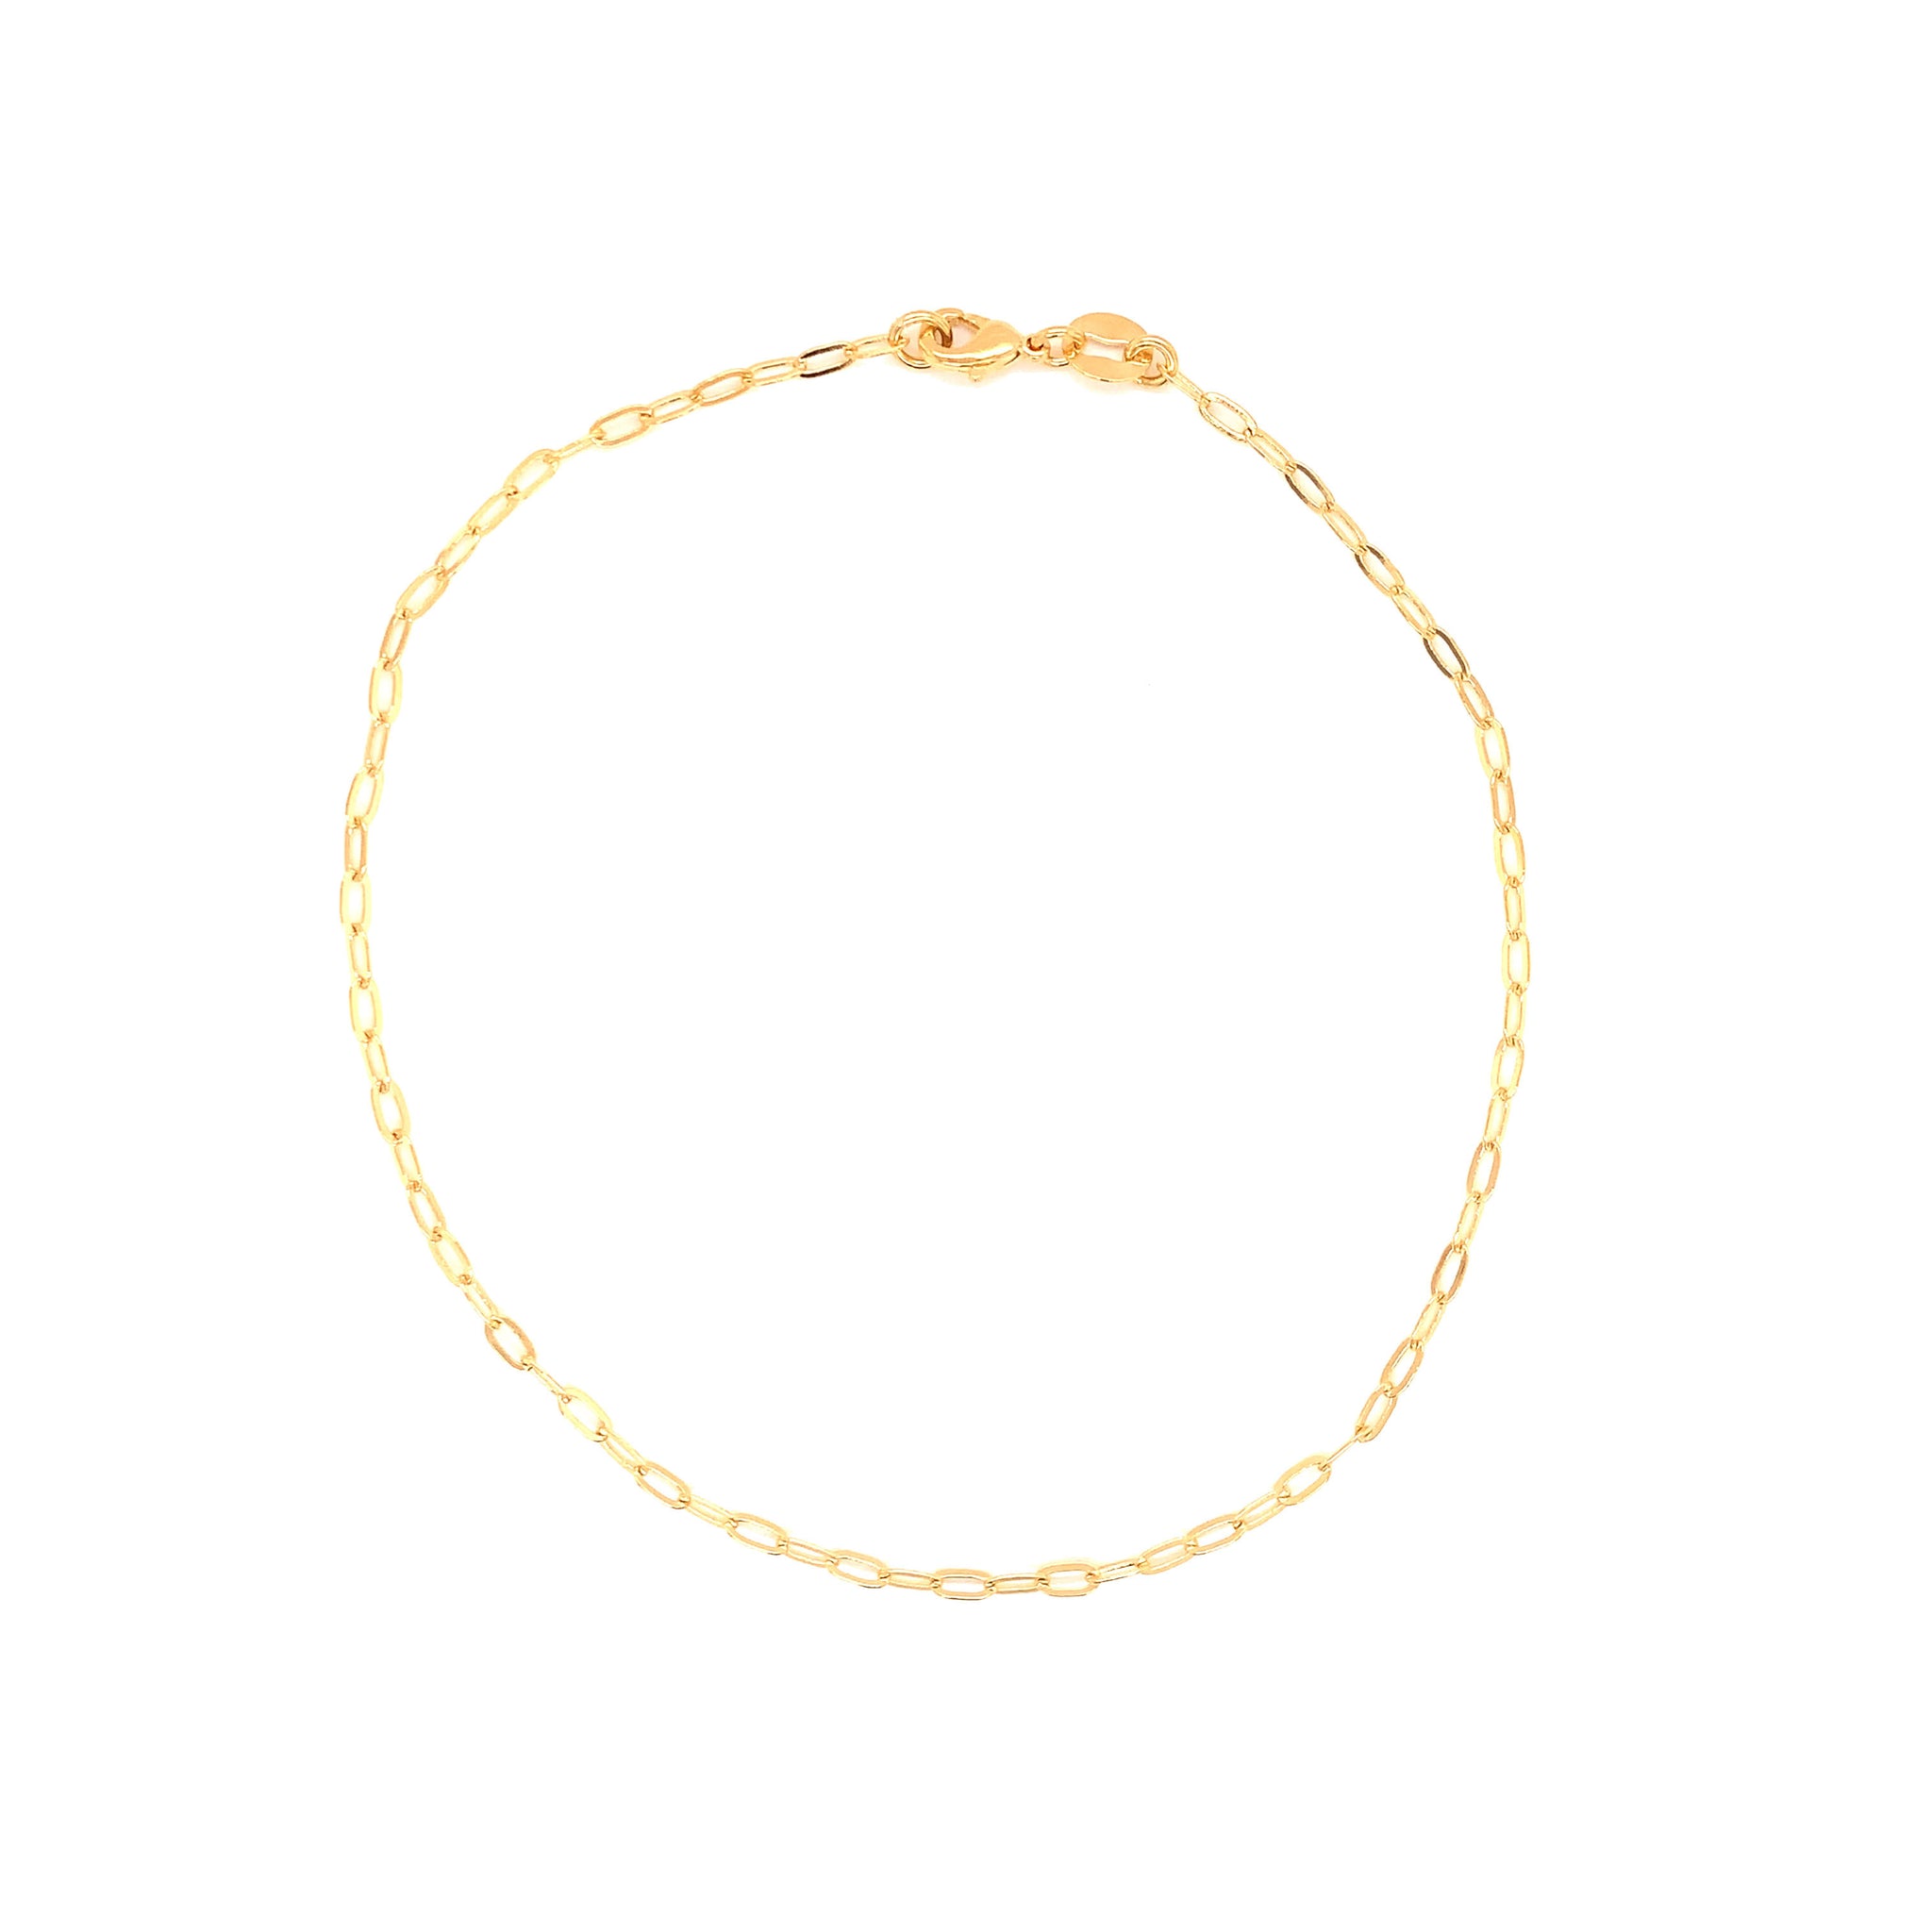 Tiny 2mm Gold Filled Paperclip Chain Anklet